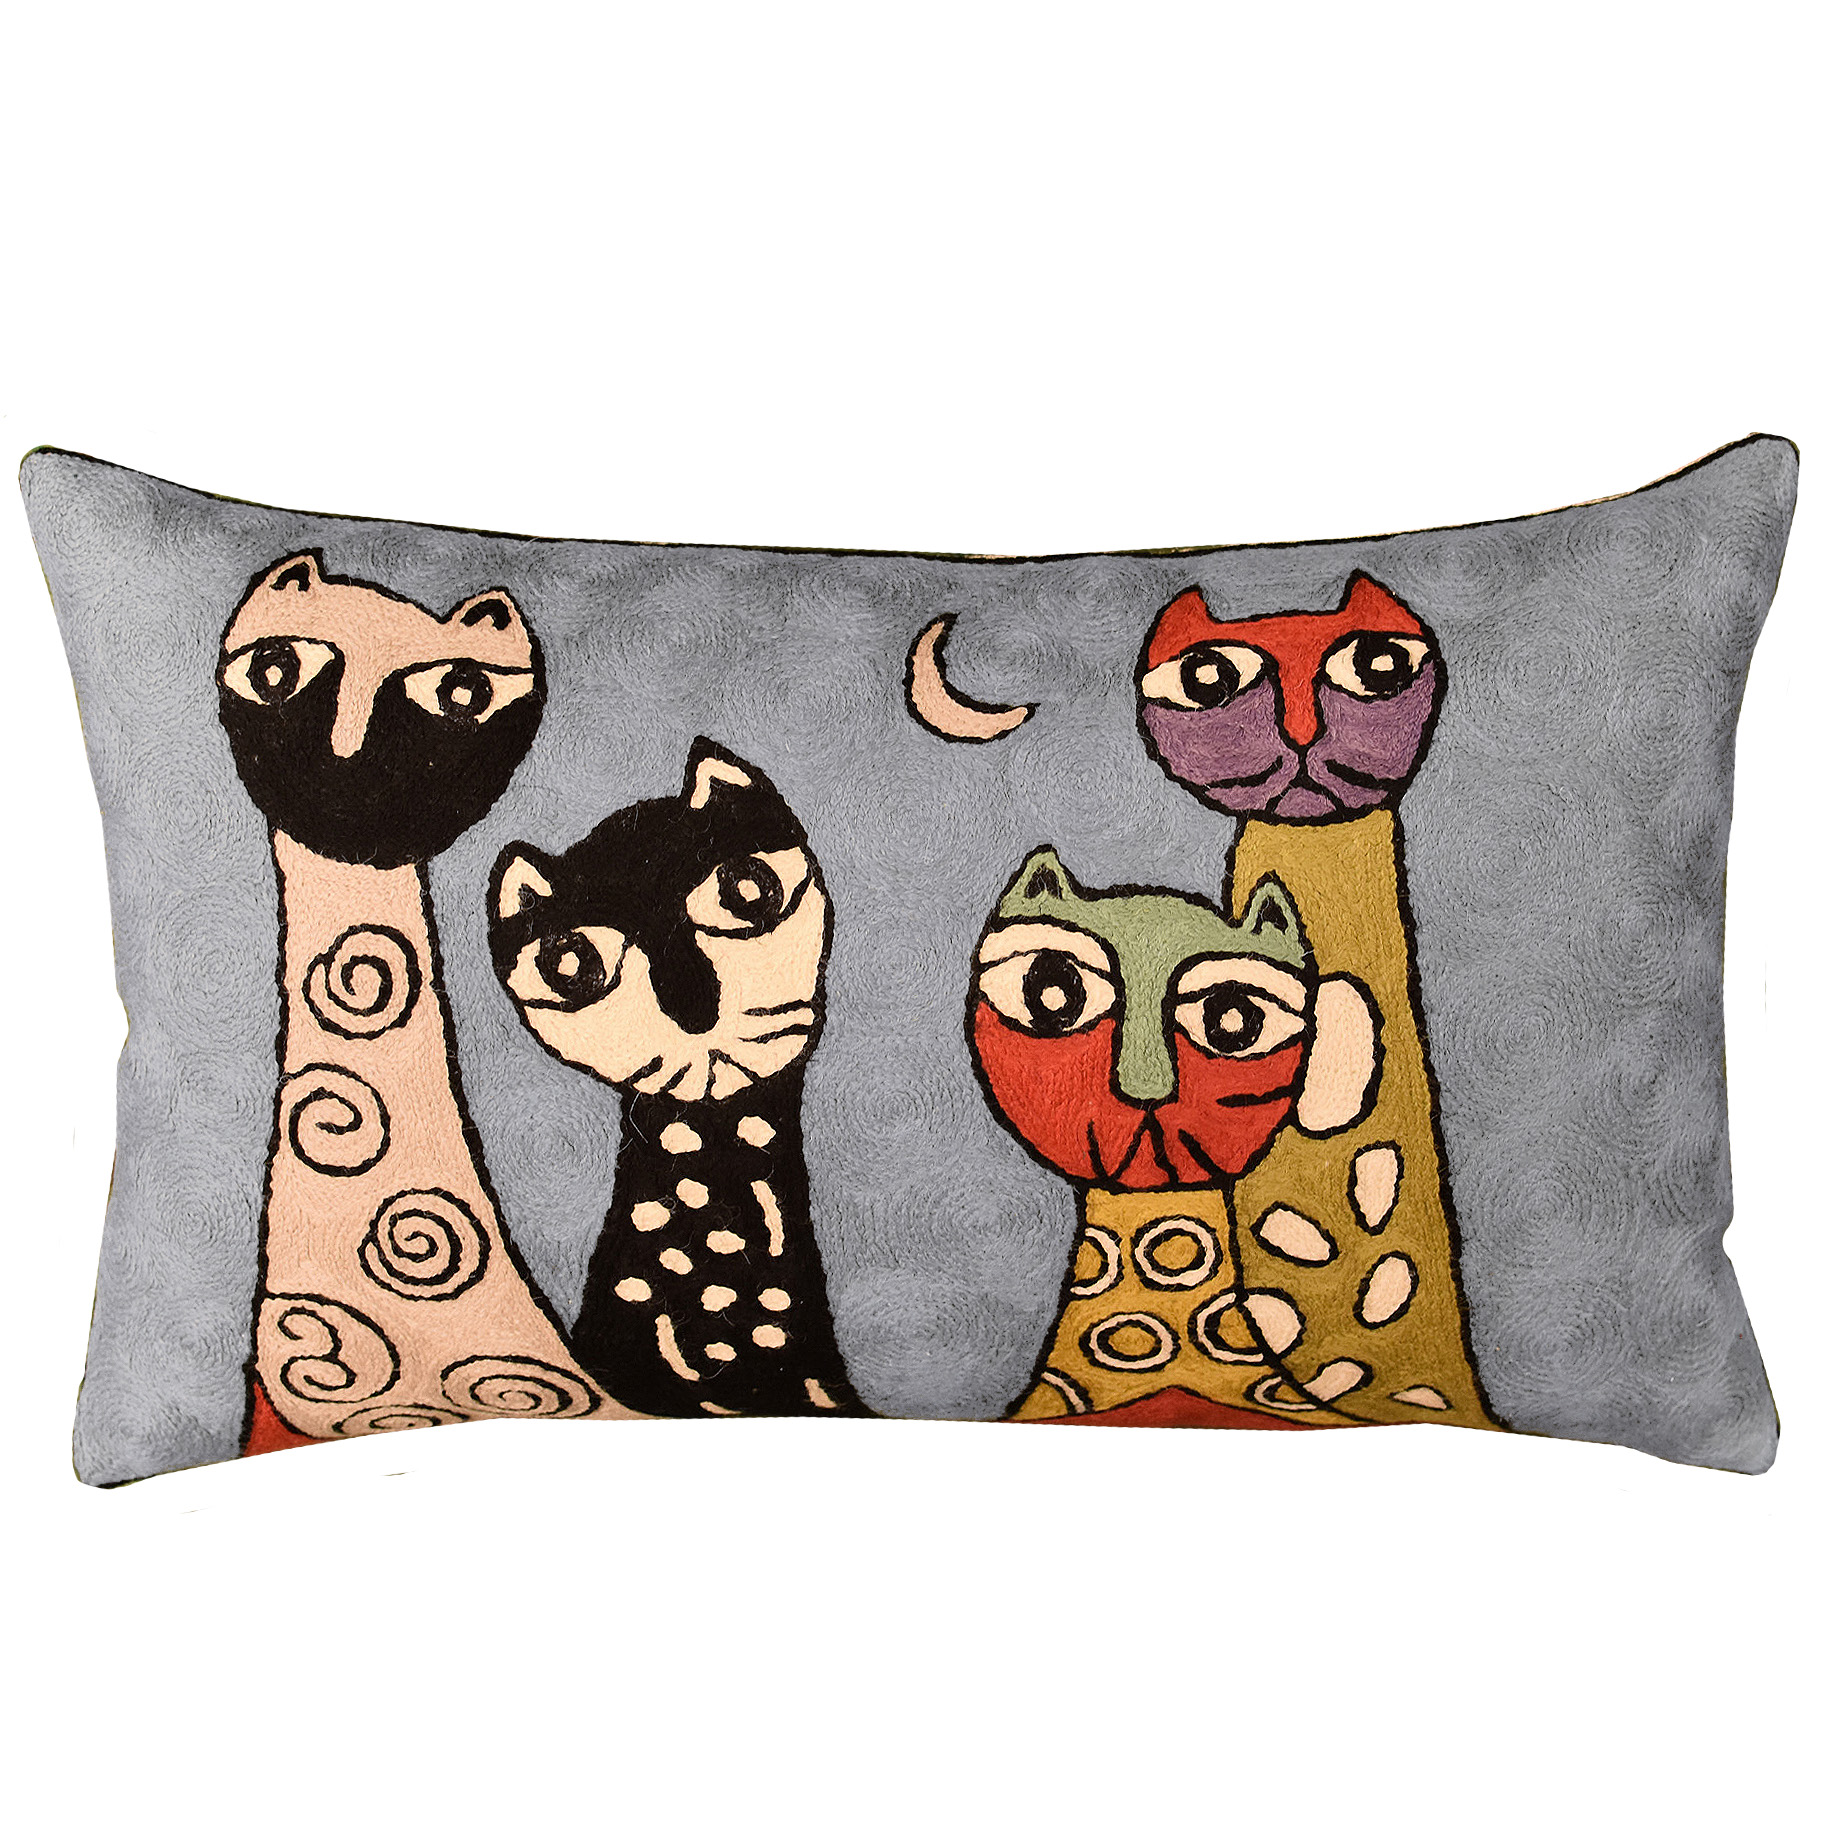 Lumbar Picasso Blue Cat Pillow Cover Quadruplets Hand Embroidered ...